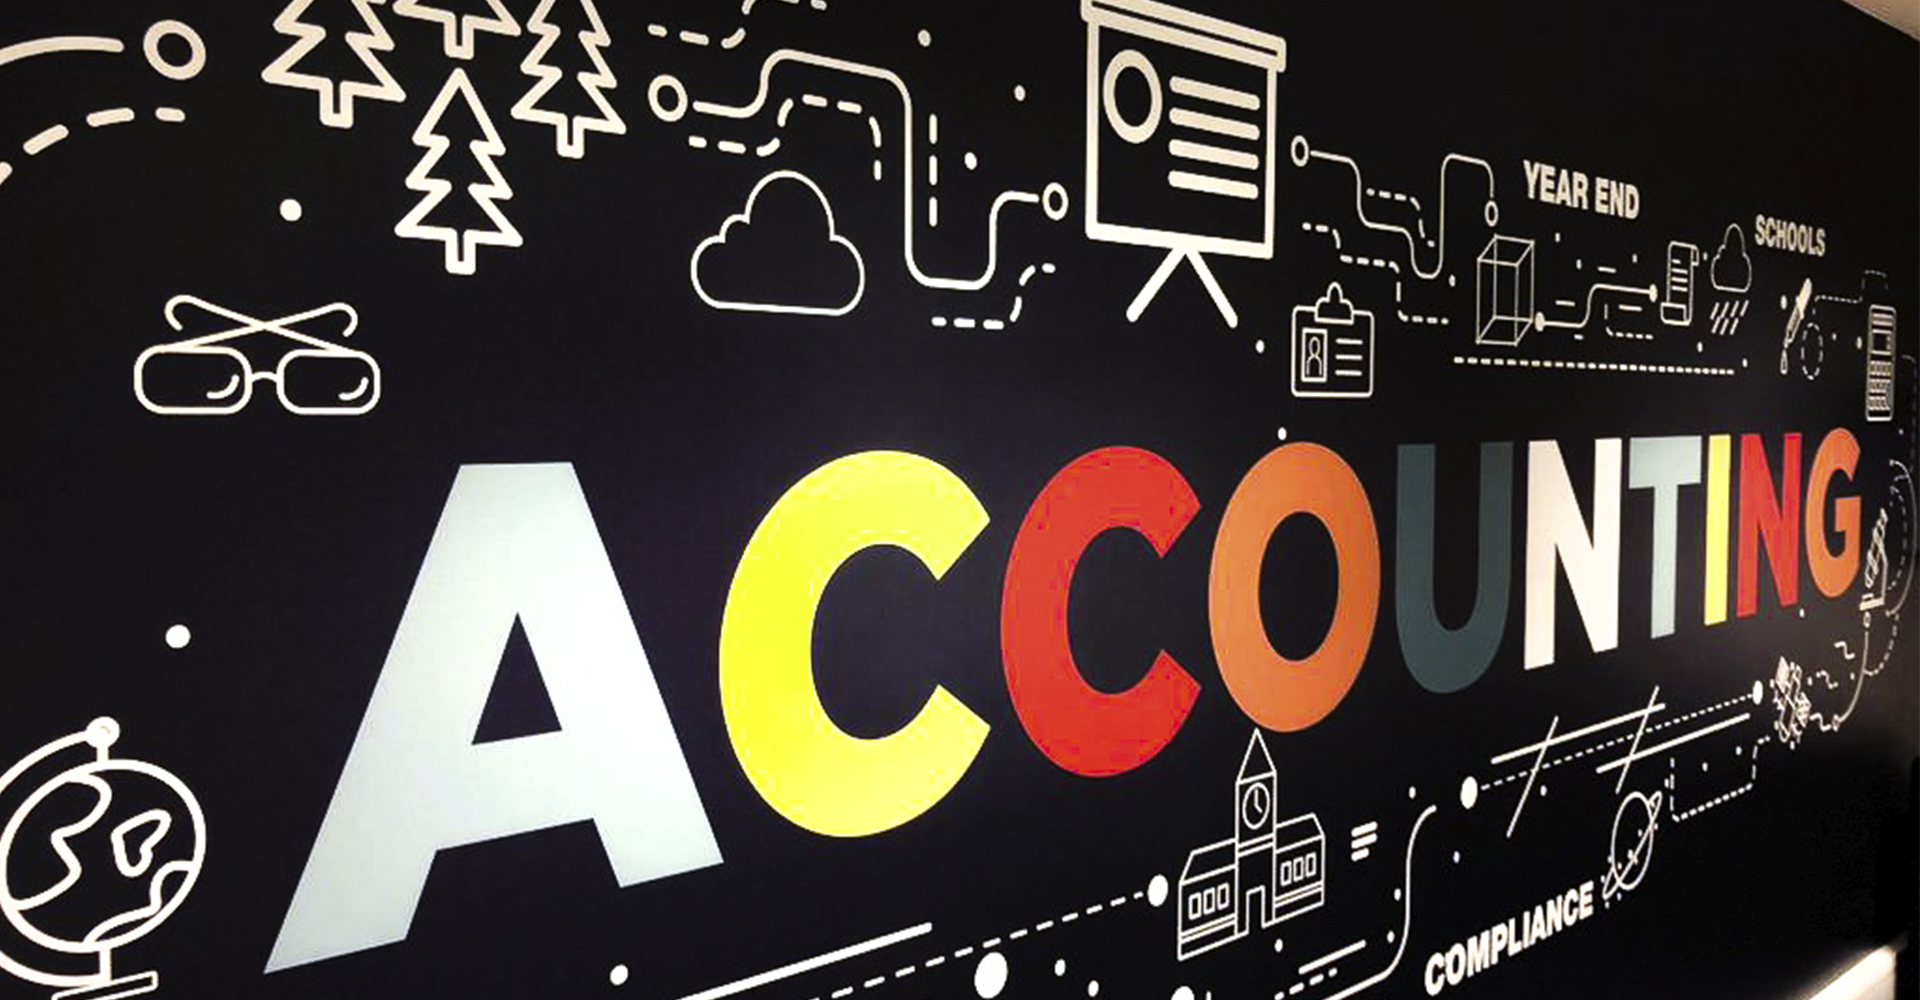 A blackboard displaying the office branding for accounting.